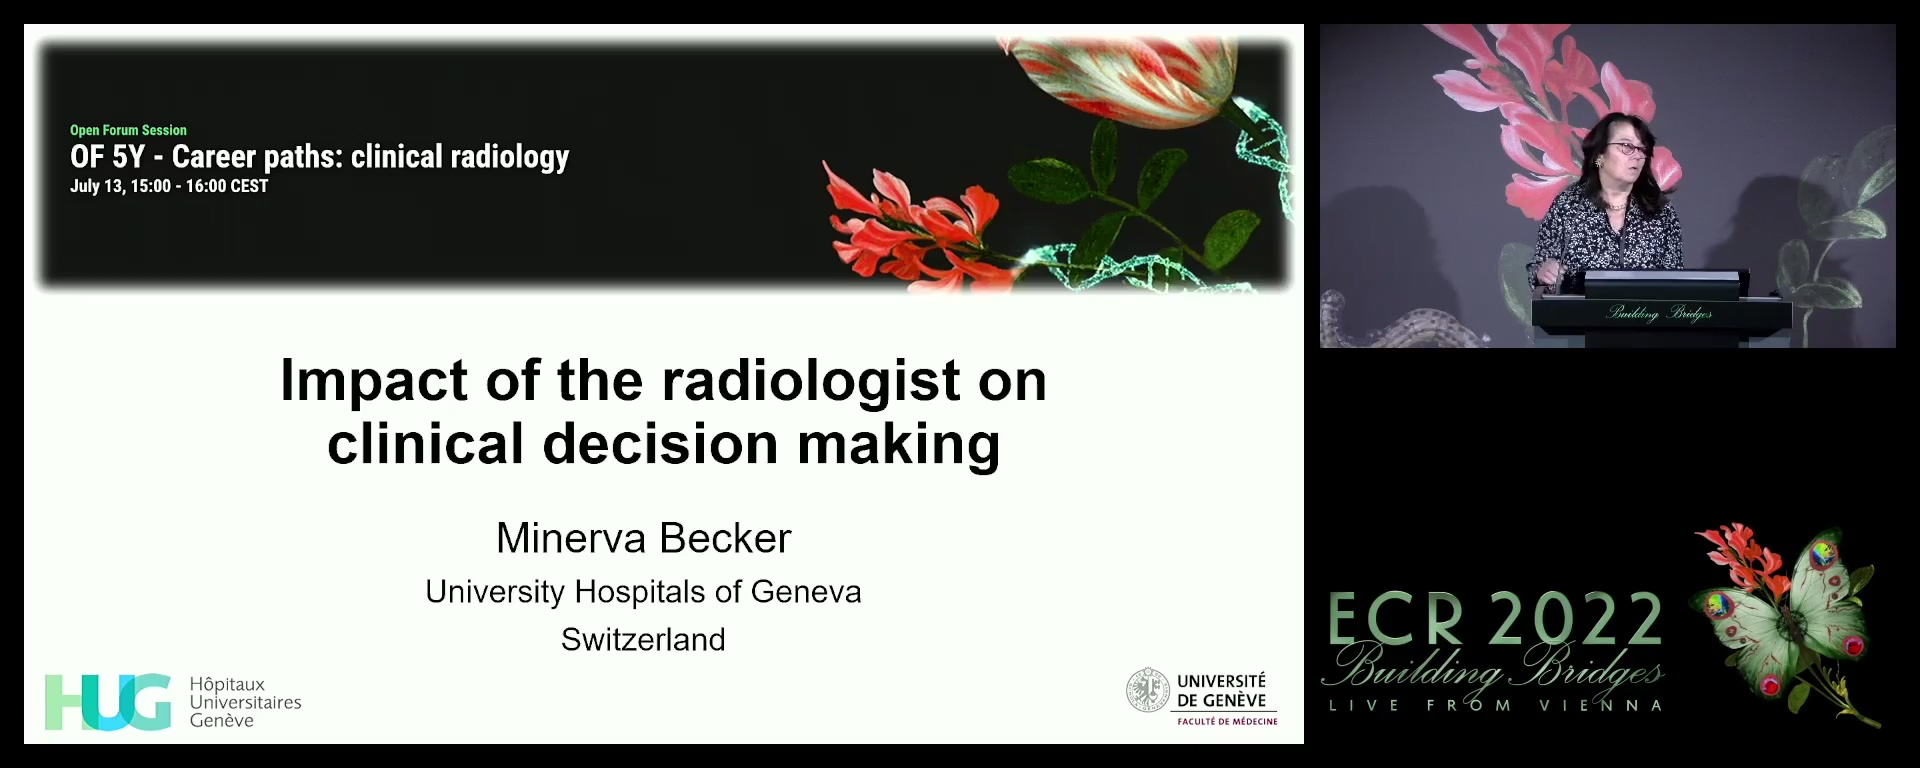 Impact of the radiologist on clinical decision making